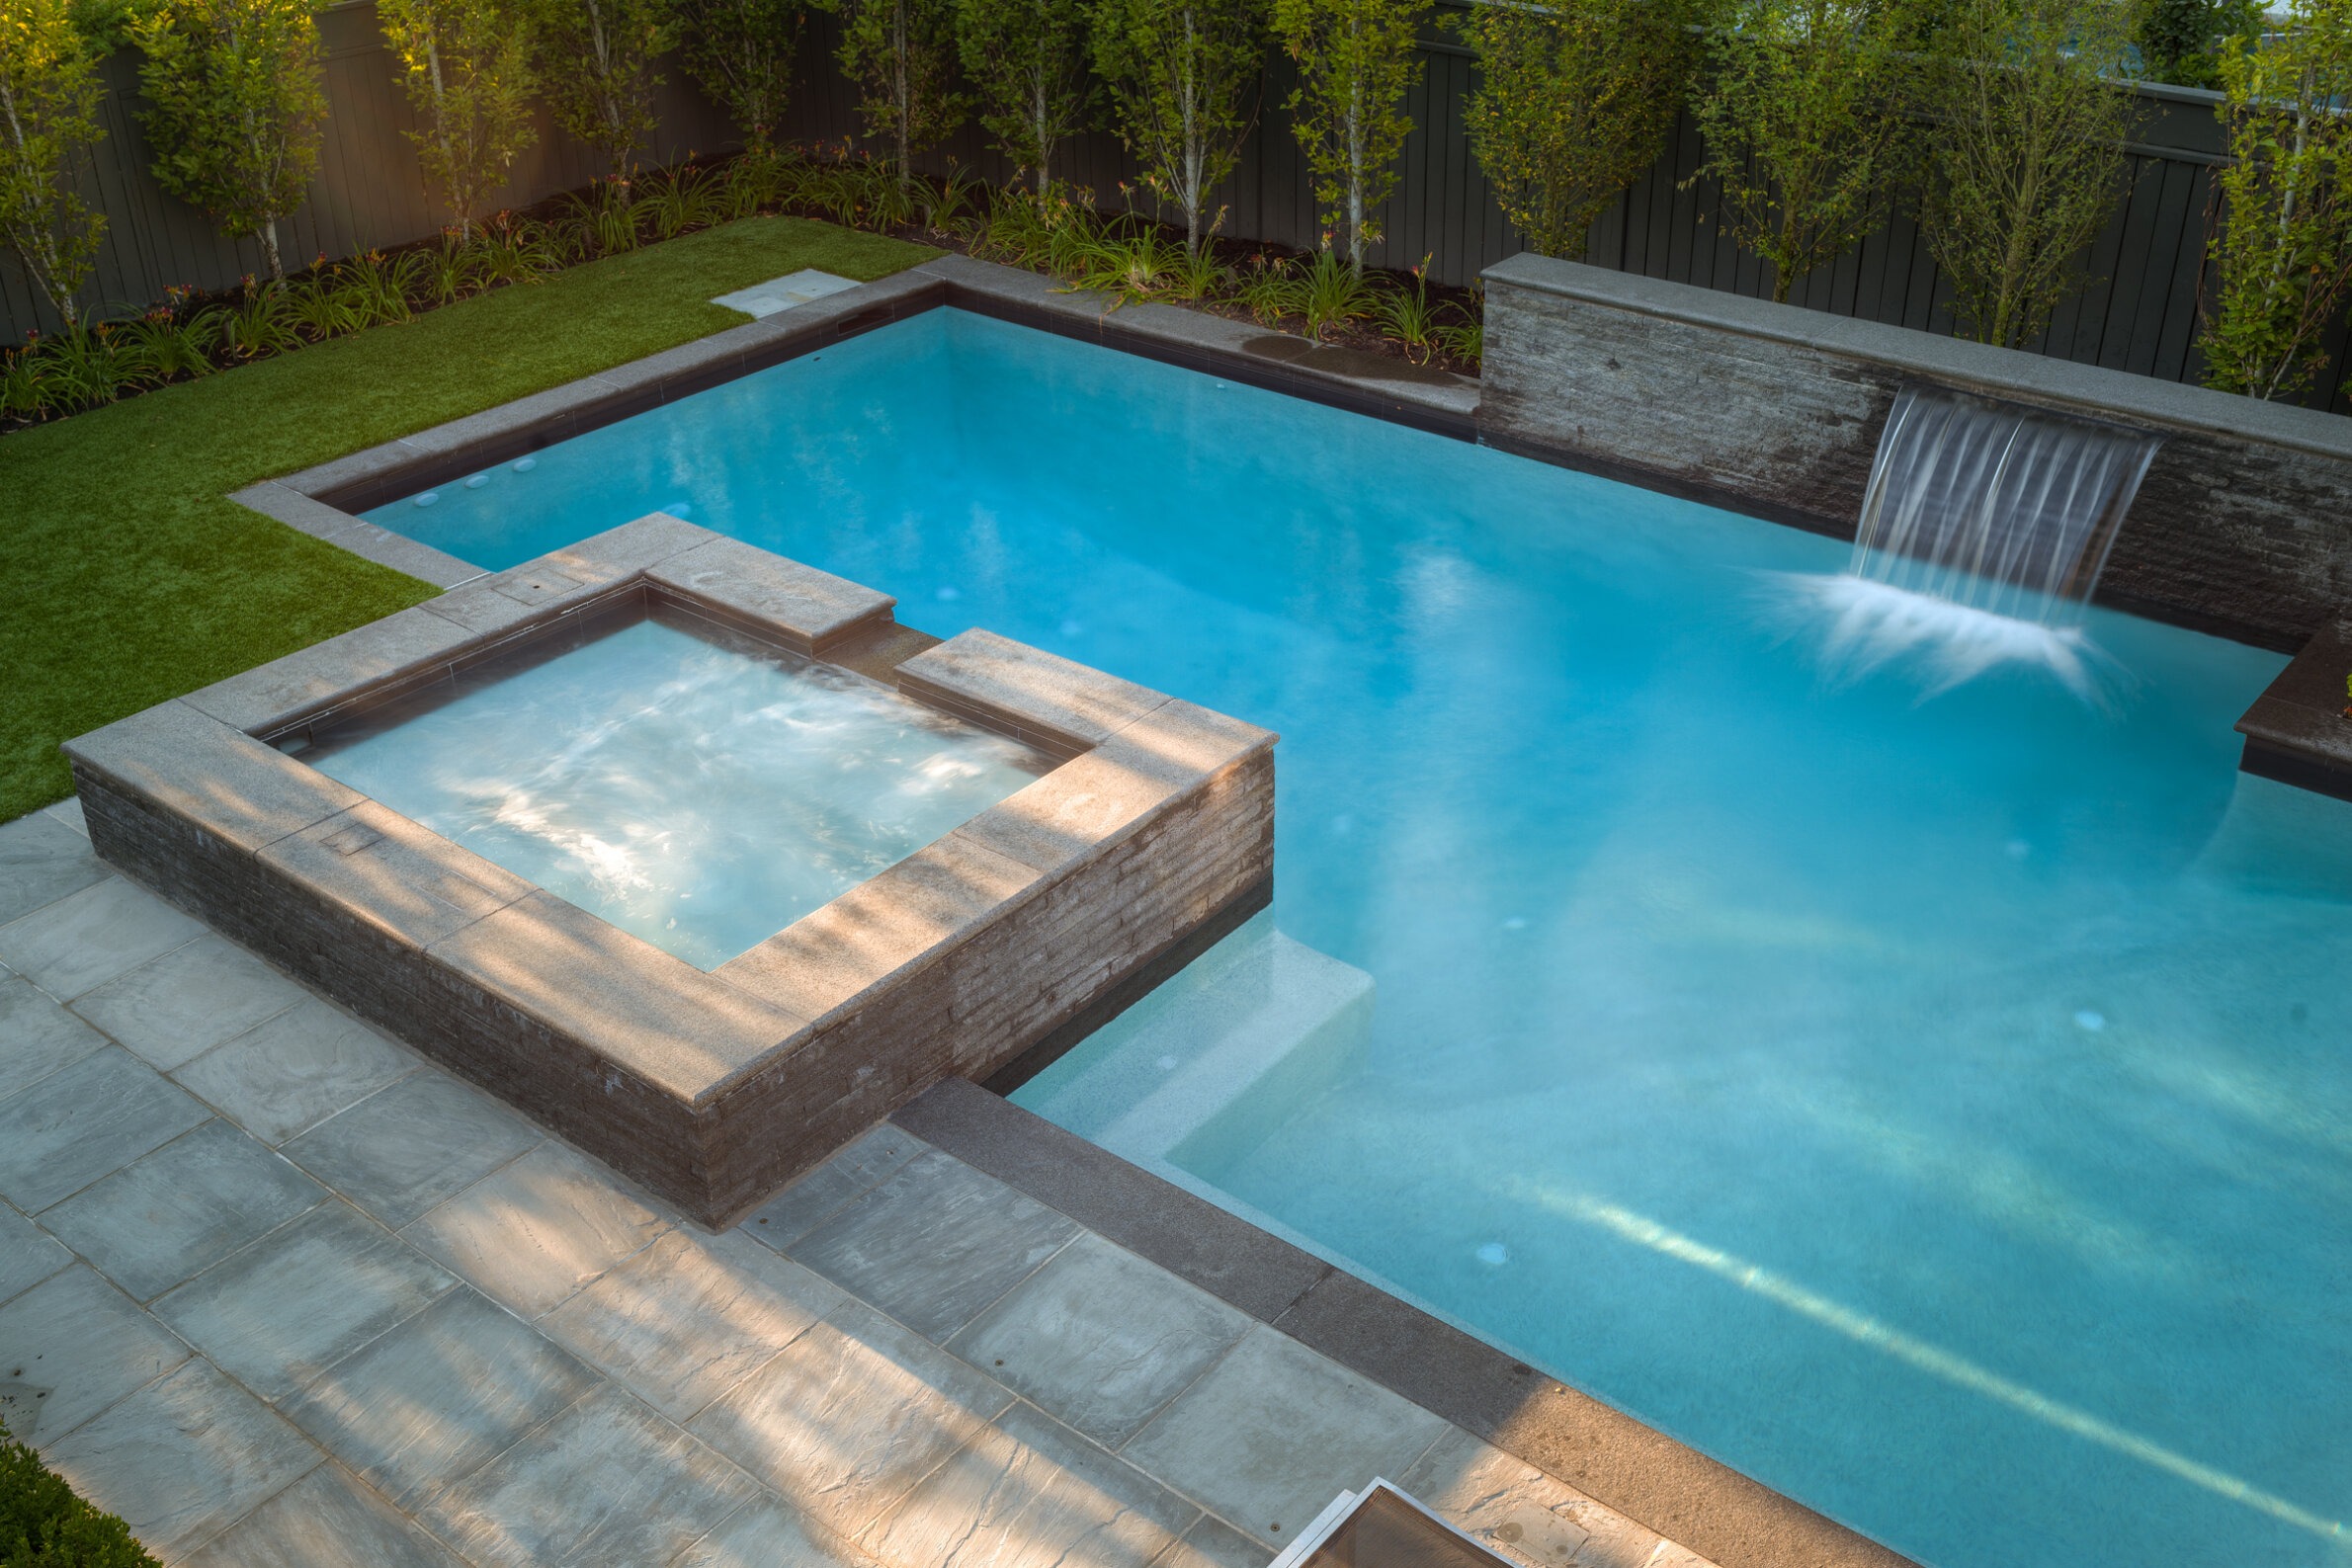 A serene backyard featuring a large swimming pool with a waterfall and an attached hot tub, surrounded by a lush lawn and privacy fencing.